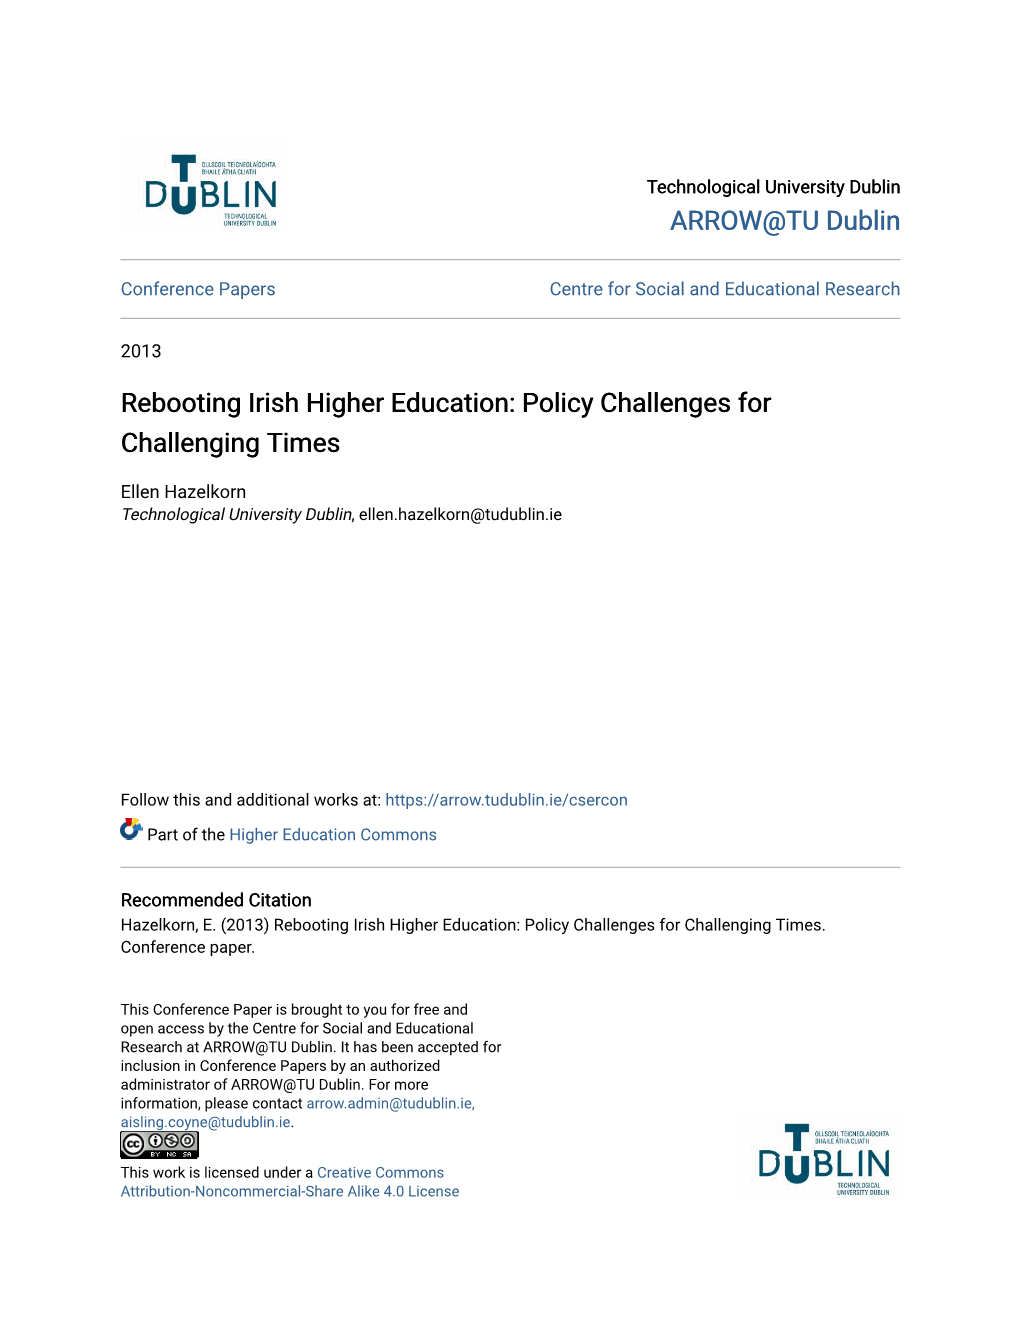 Rebooting Irish Higher Education: Policy Challenges for Challenging Times